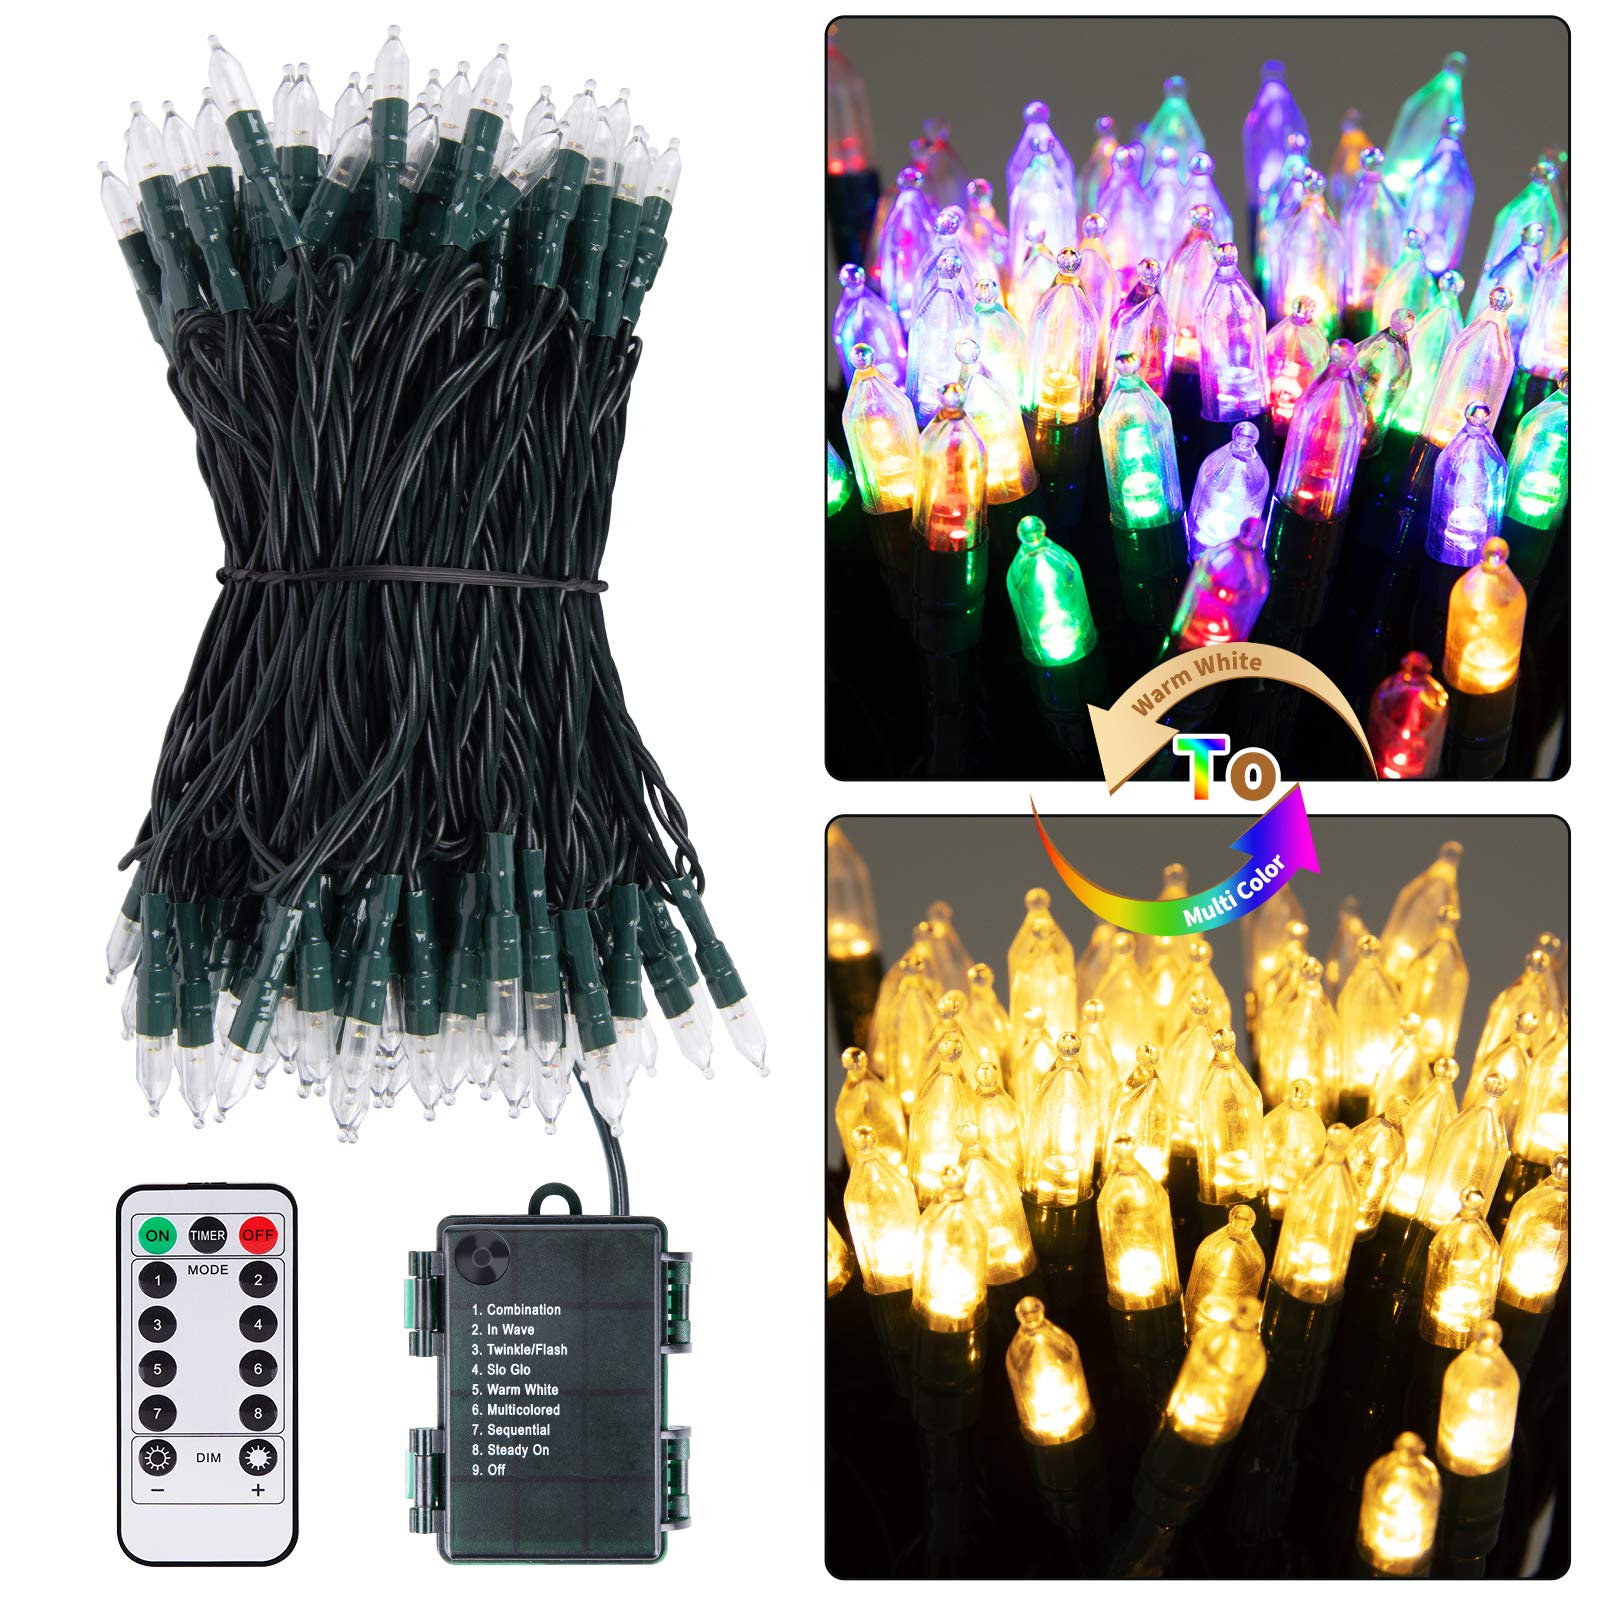 2 x 18 Feet / 50 LED / Warm White and Multicolor / Green Wire / Remote